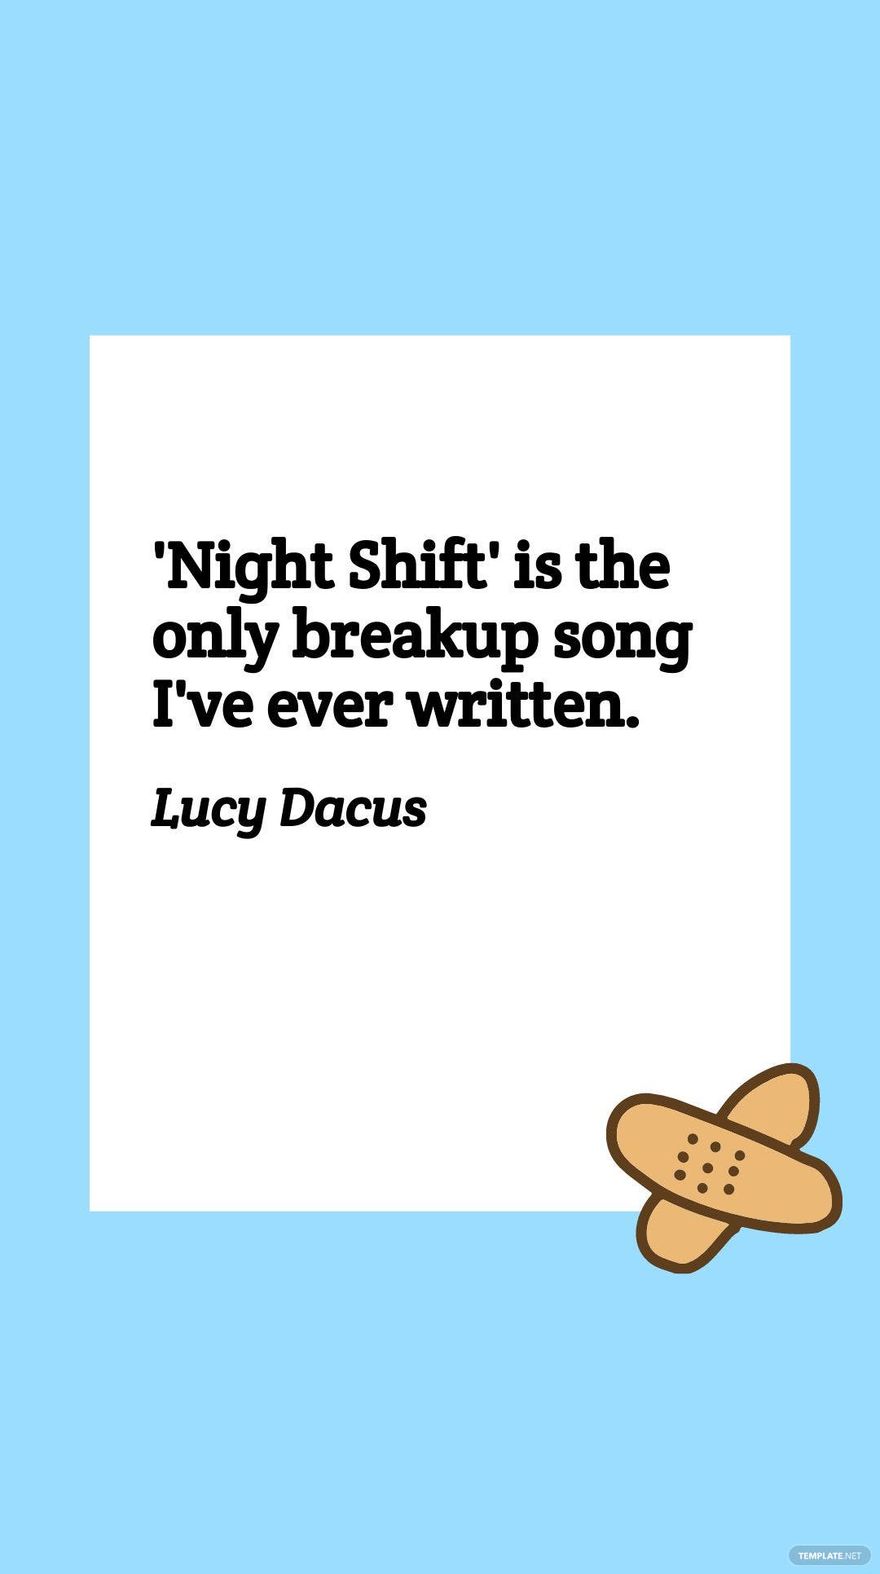 Free Lucy Dacus - 'Night Shift' is the only breakup song I've ever written. in JPG